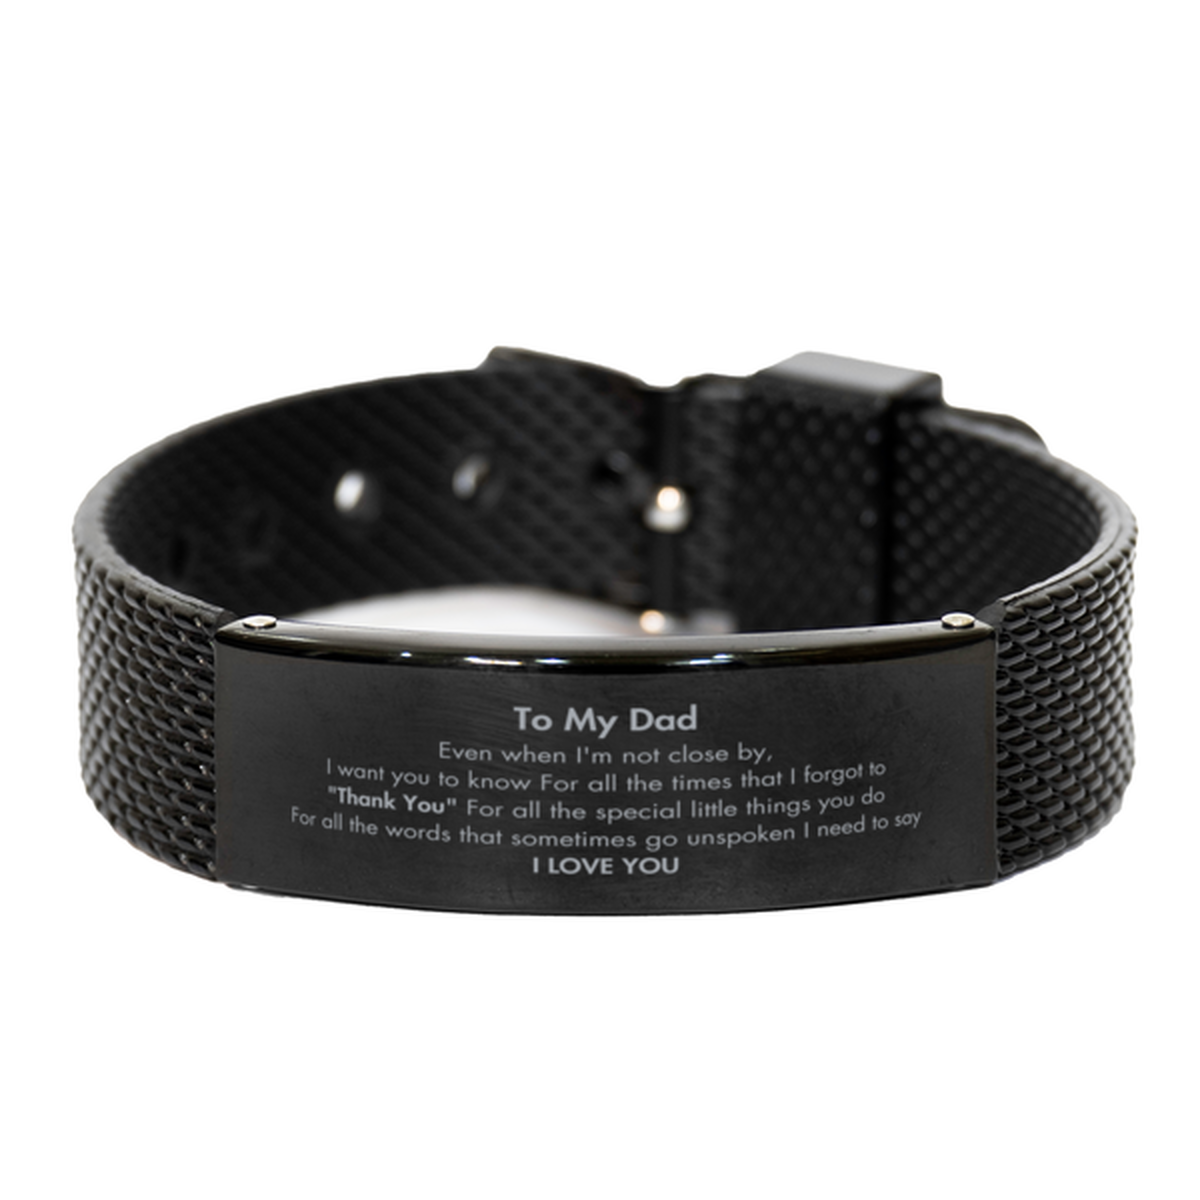 Thank You Gifts for Dad, Keepsake Black Shark Mesh Bracelet Gifts for Dad Birthday Mother's day Father's Day Dad For all the words That sometimes go unspoken I need to say I LOVE YOU